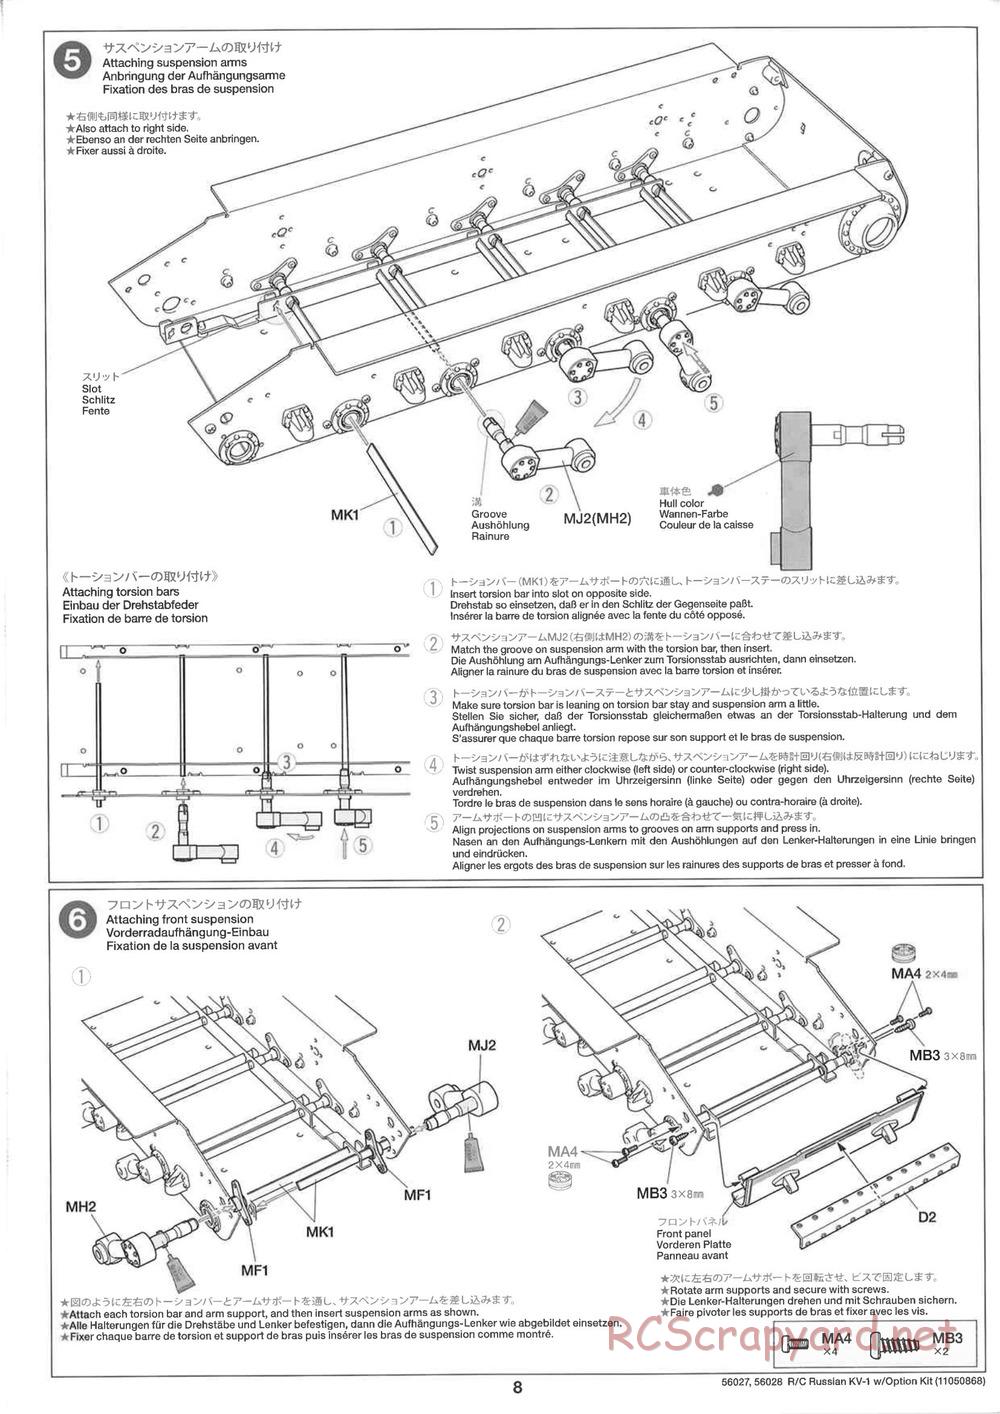 Tamiya - Russian Heavy Tank KV-1 - 1/16 Scale Chassis - Manual - Page 8